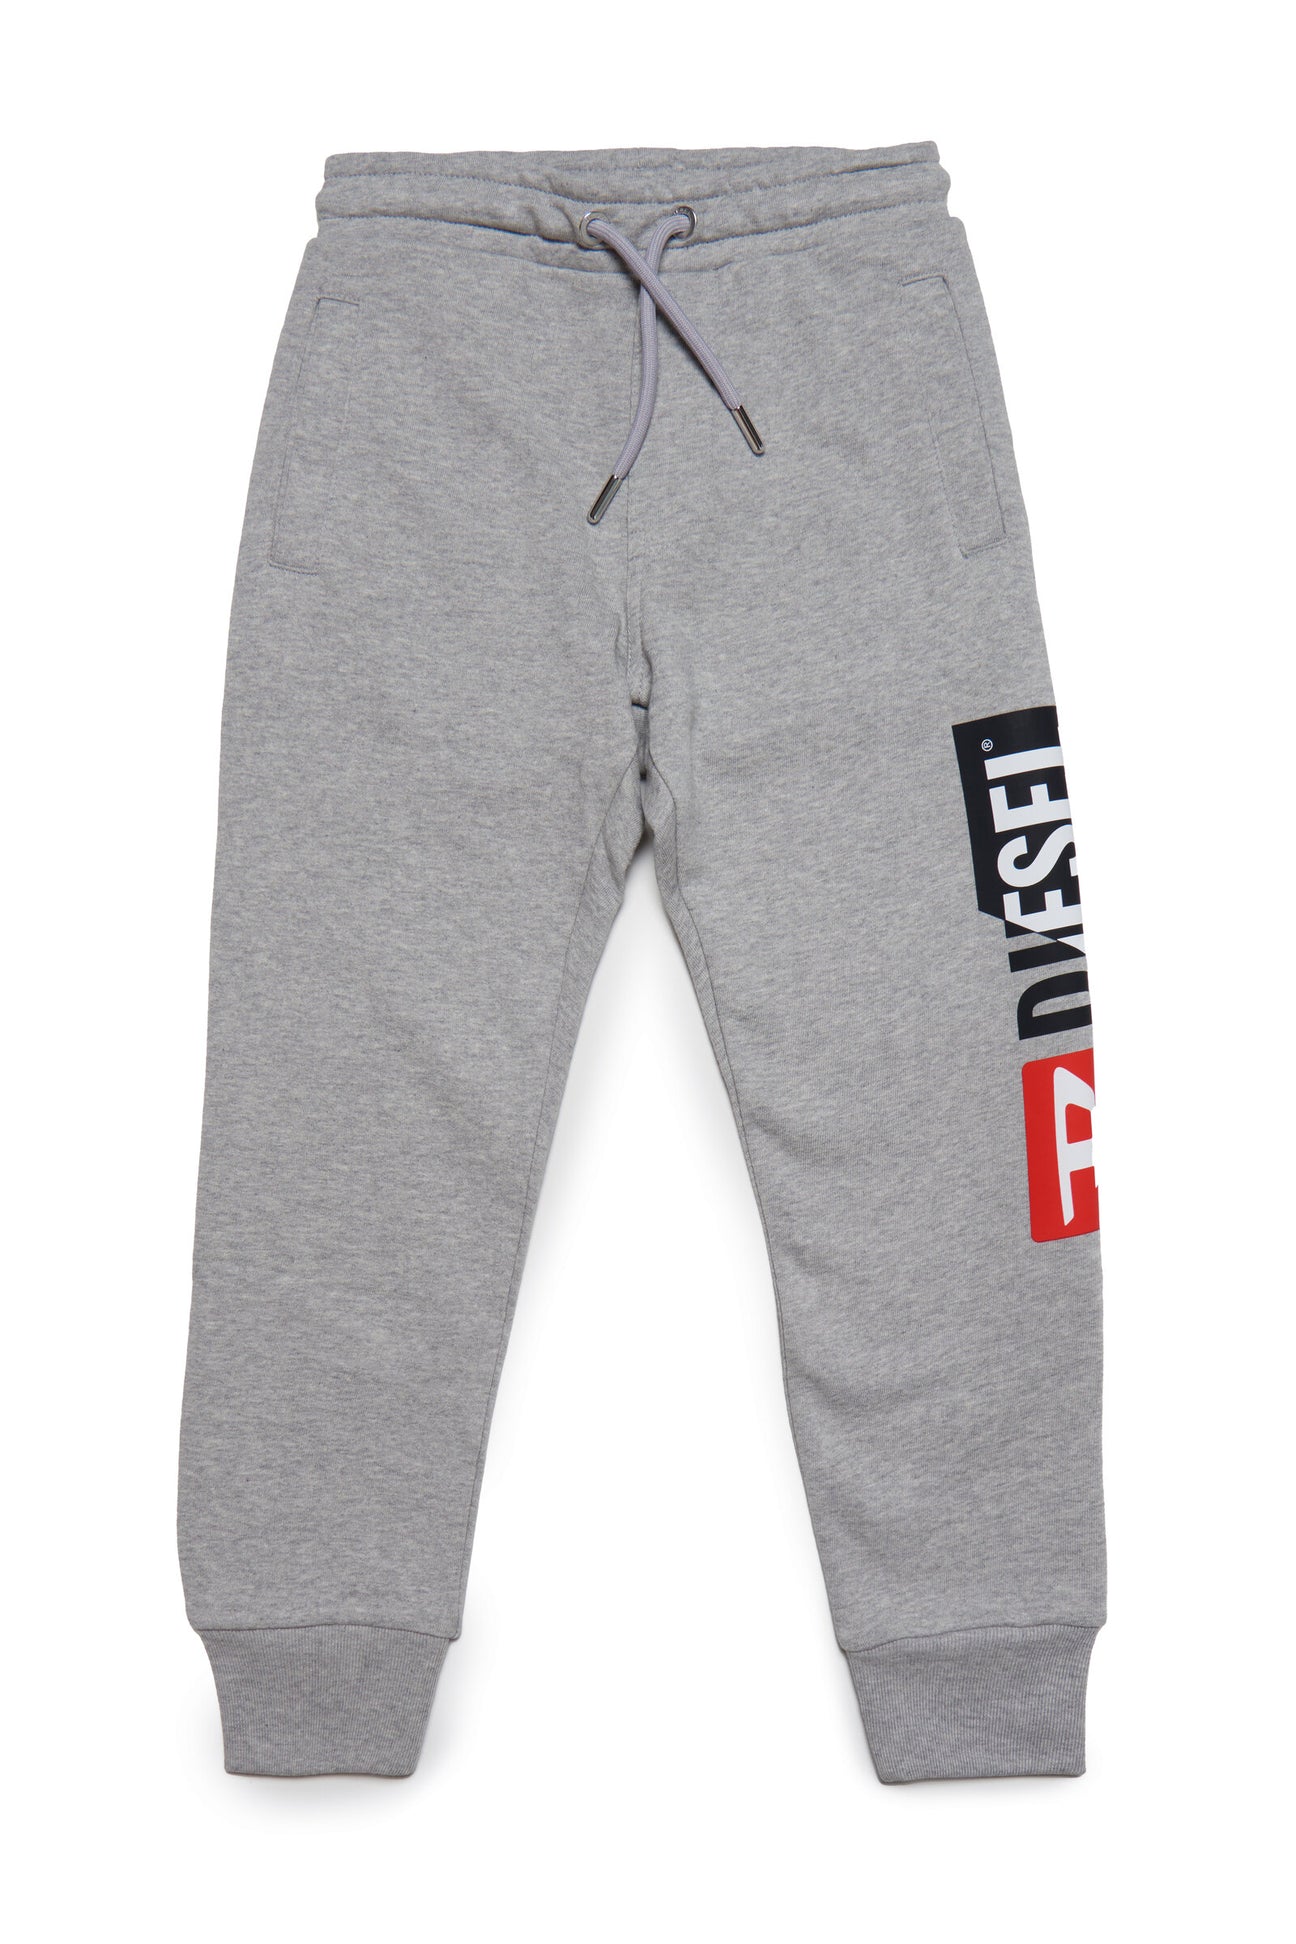 Gray jogger pants with Diesel double logo 